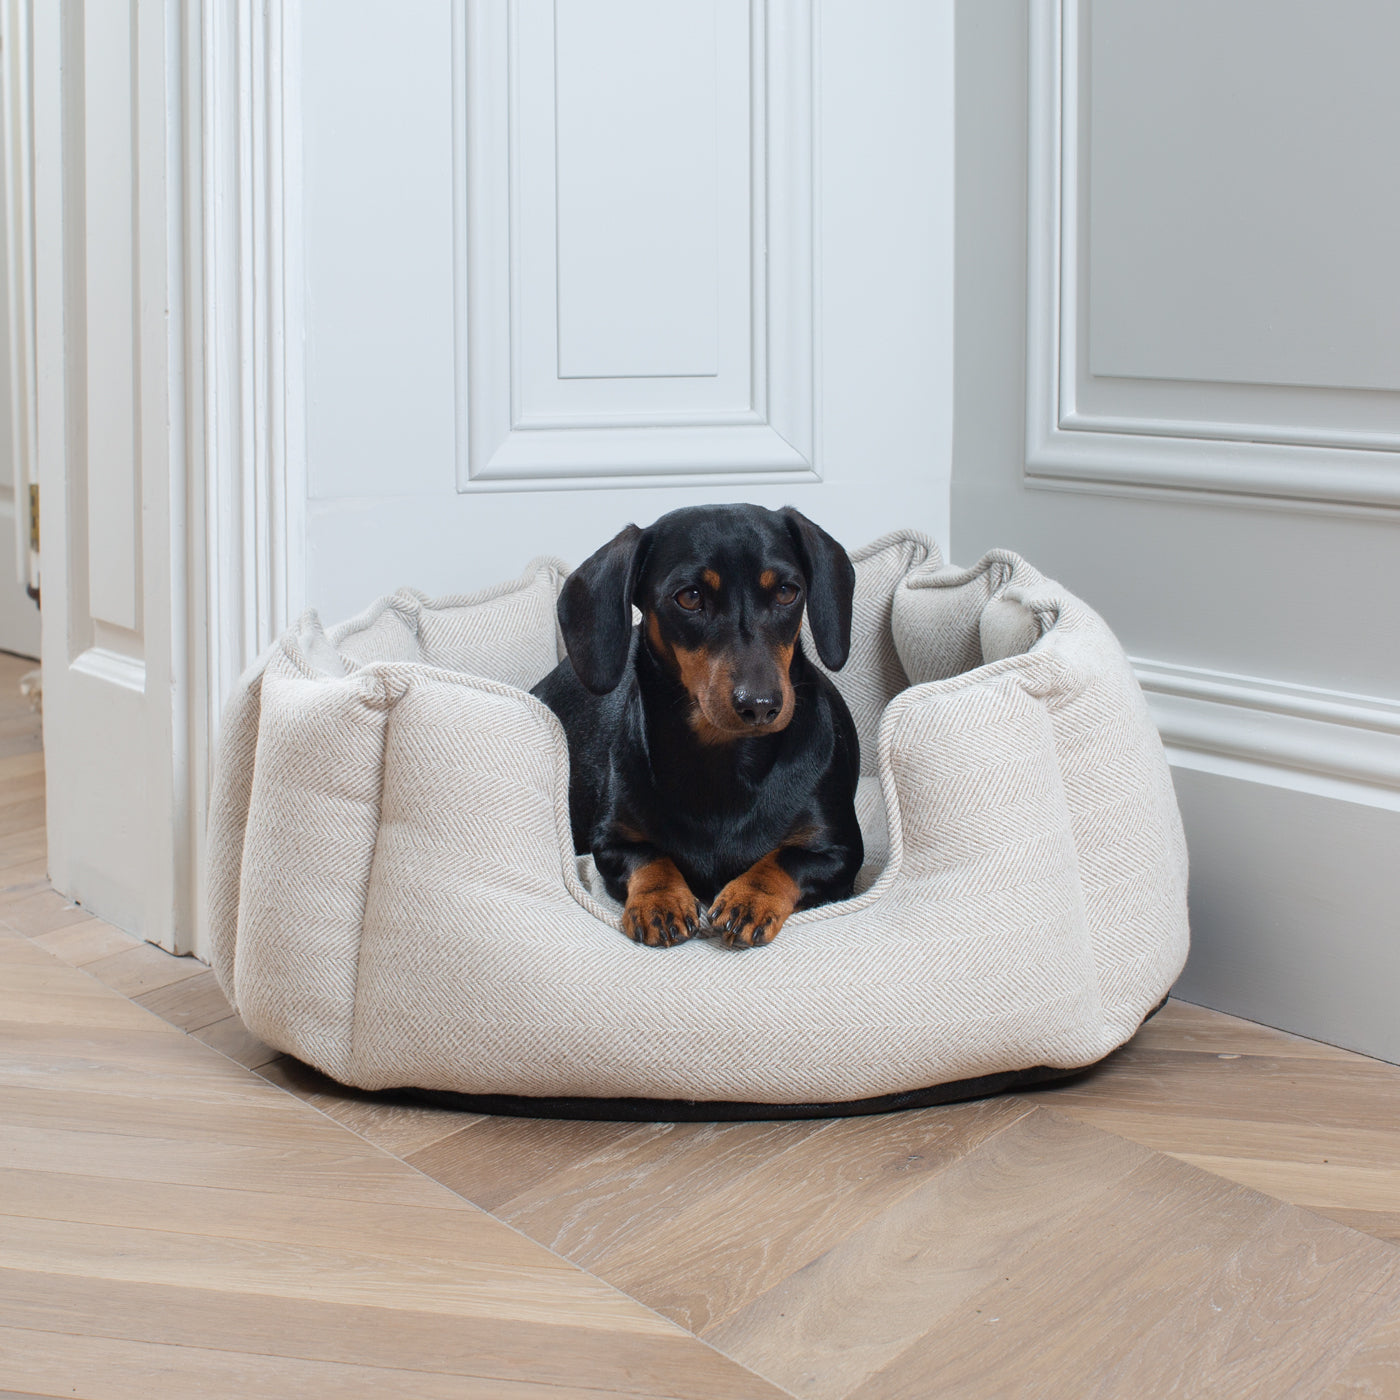 Discover Our Luxurious High Wall Bed For Dogs, Featuring inner pillow with plush teddy fleece on one side To Craft The Perfect Dogs Bed In Stunning Natural Herringbone Tweed! Available To Personalise Now at Lords & Labradors 